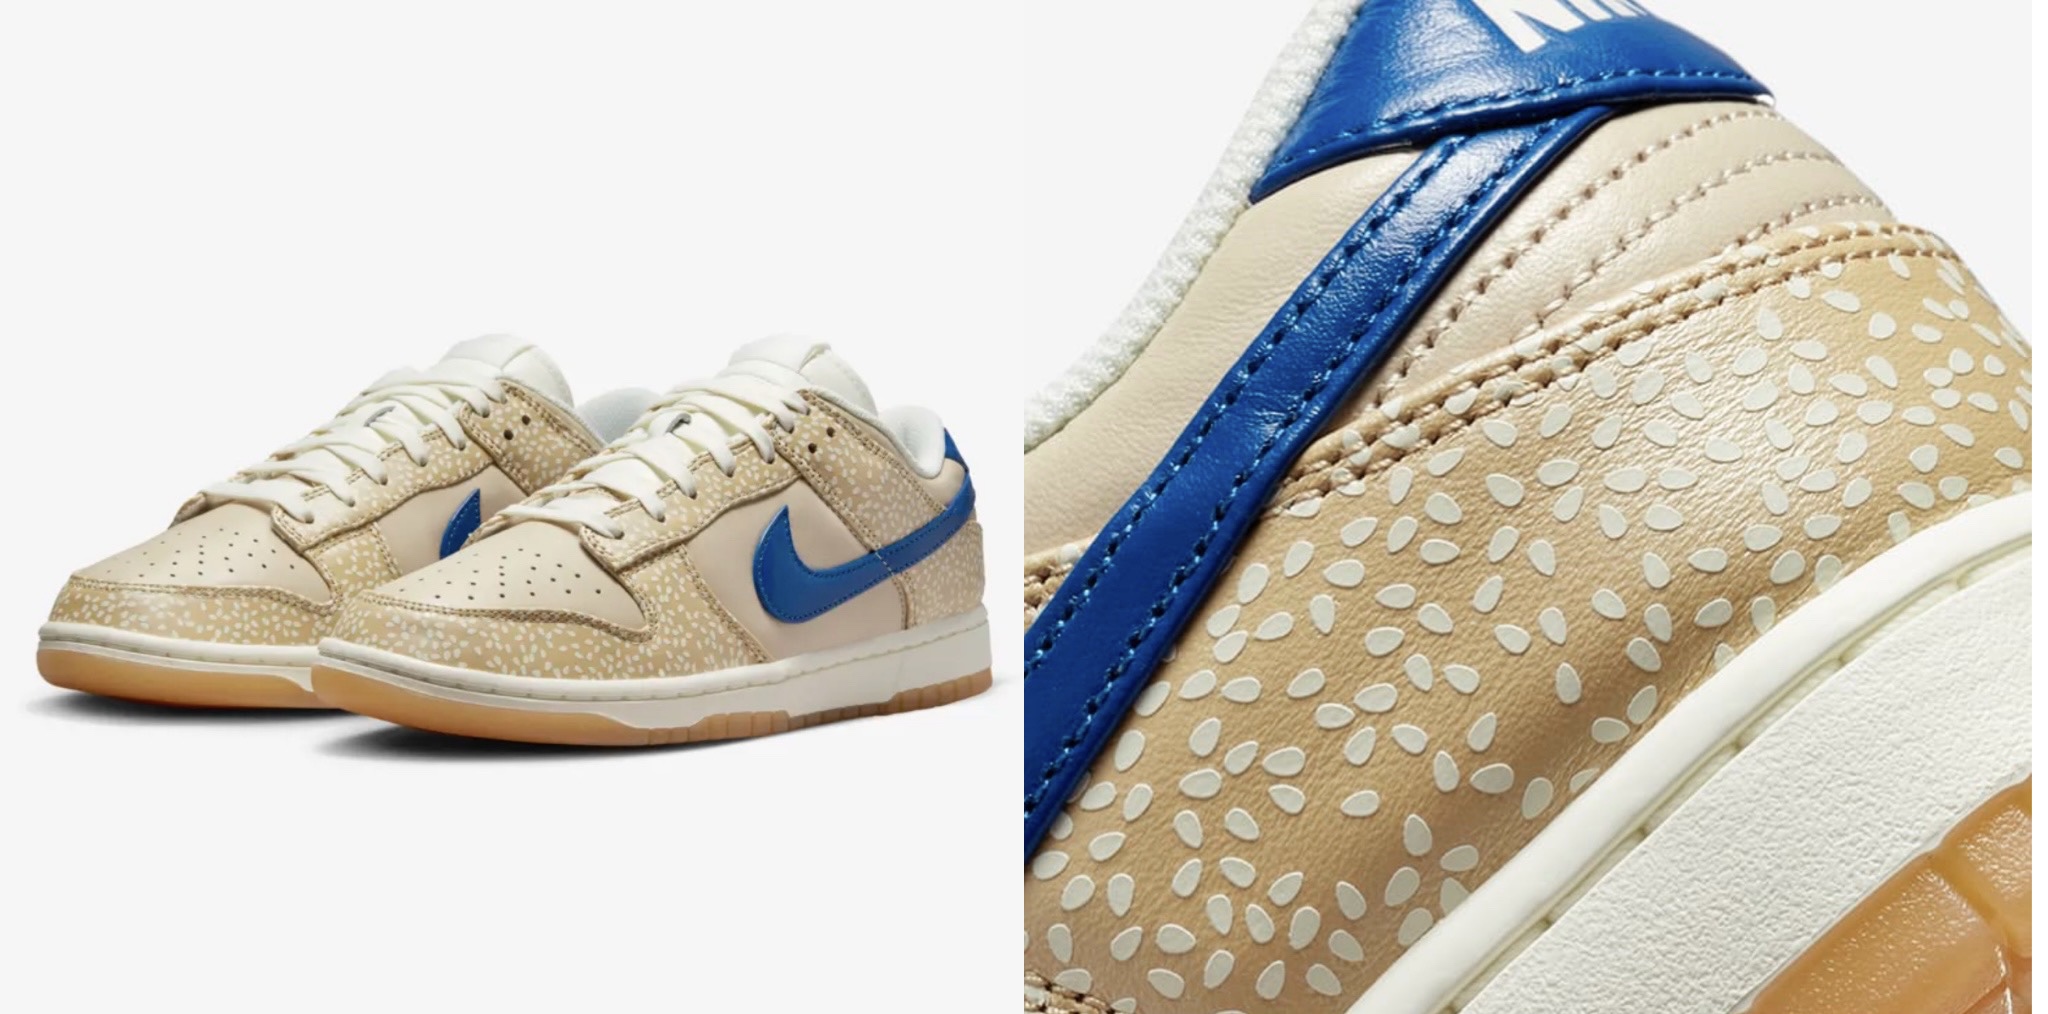 Nike has released its Dunk Low “Montreal Bagel” shoes and they’re already sold out